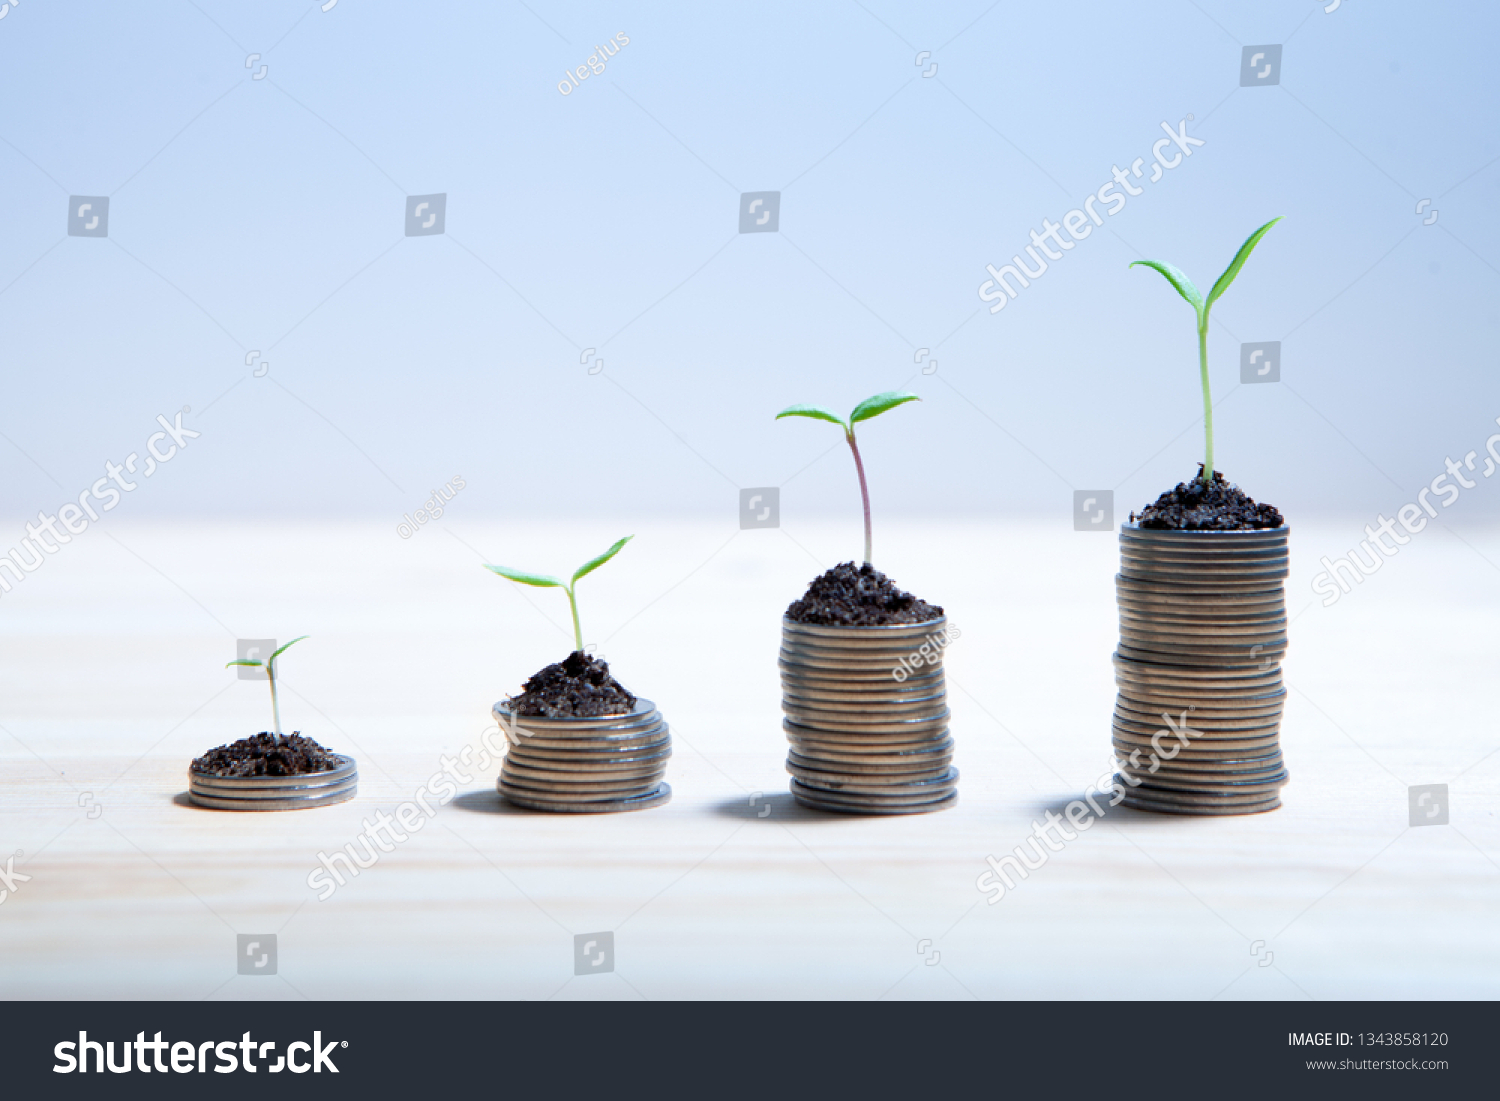 Idea money growing concept. Business success concept. Trees growing on pile of coins money  #1343858120